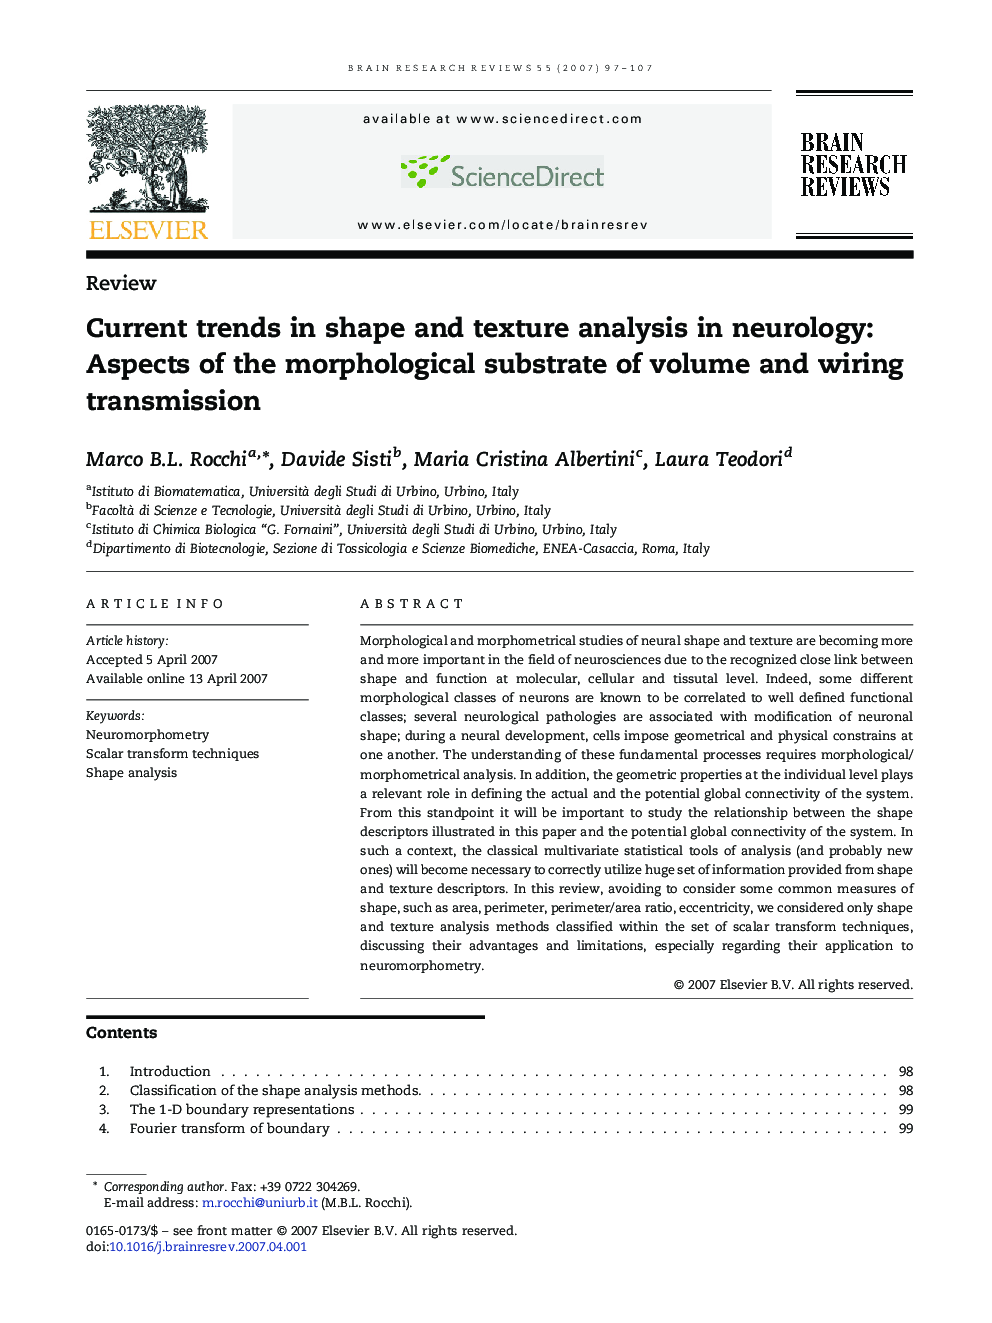 Current trends in shape and texture analysis in neurology: Aspects of the morphological substrate of volume and wiring transmission